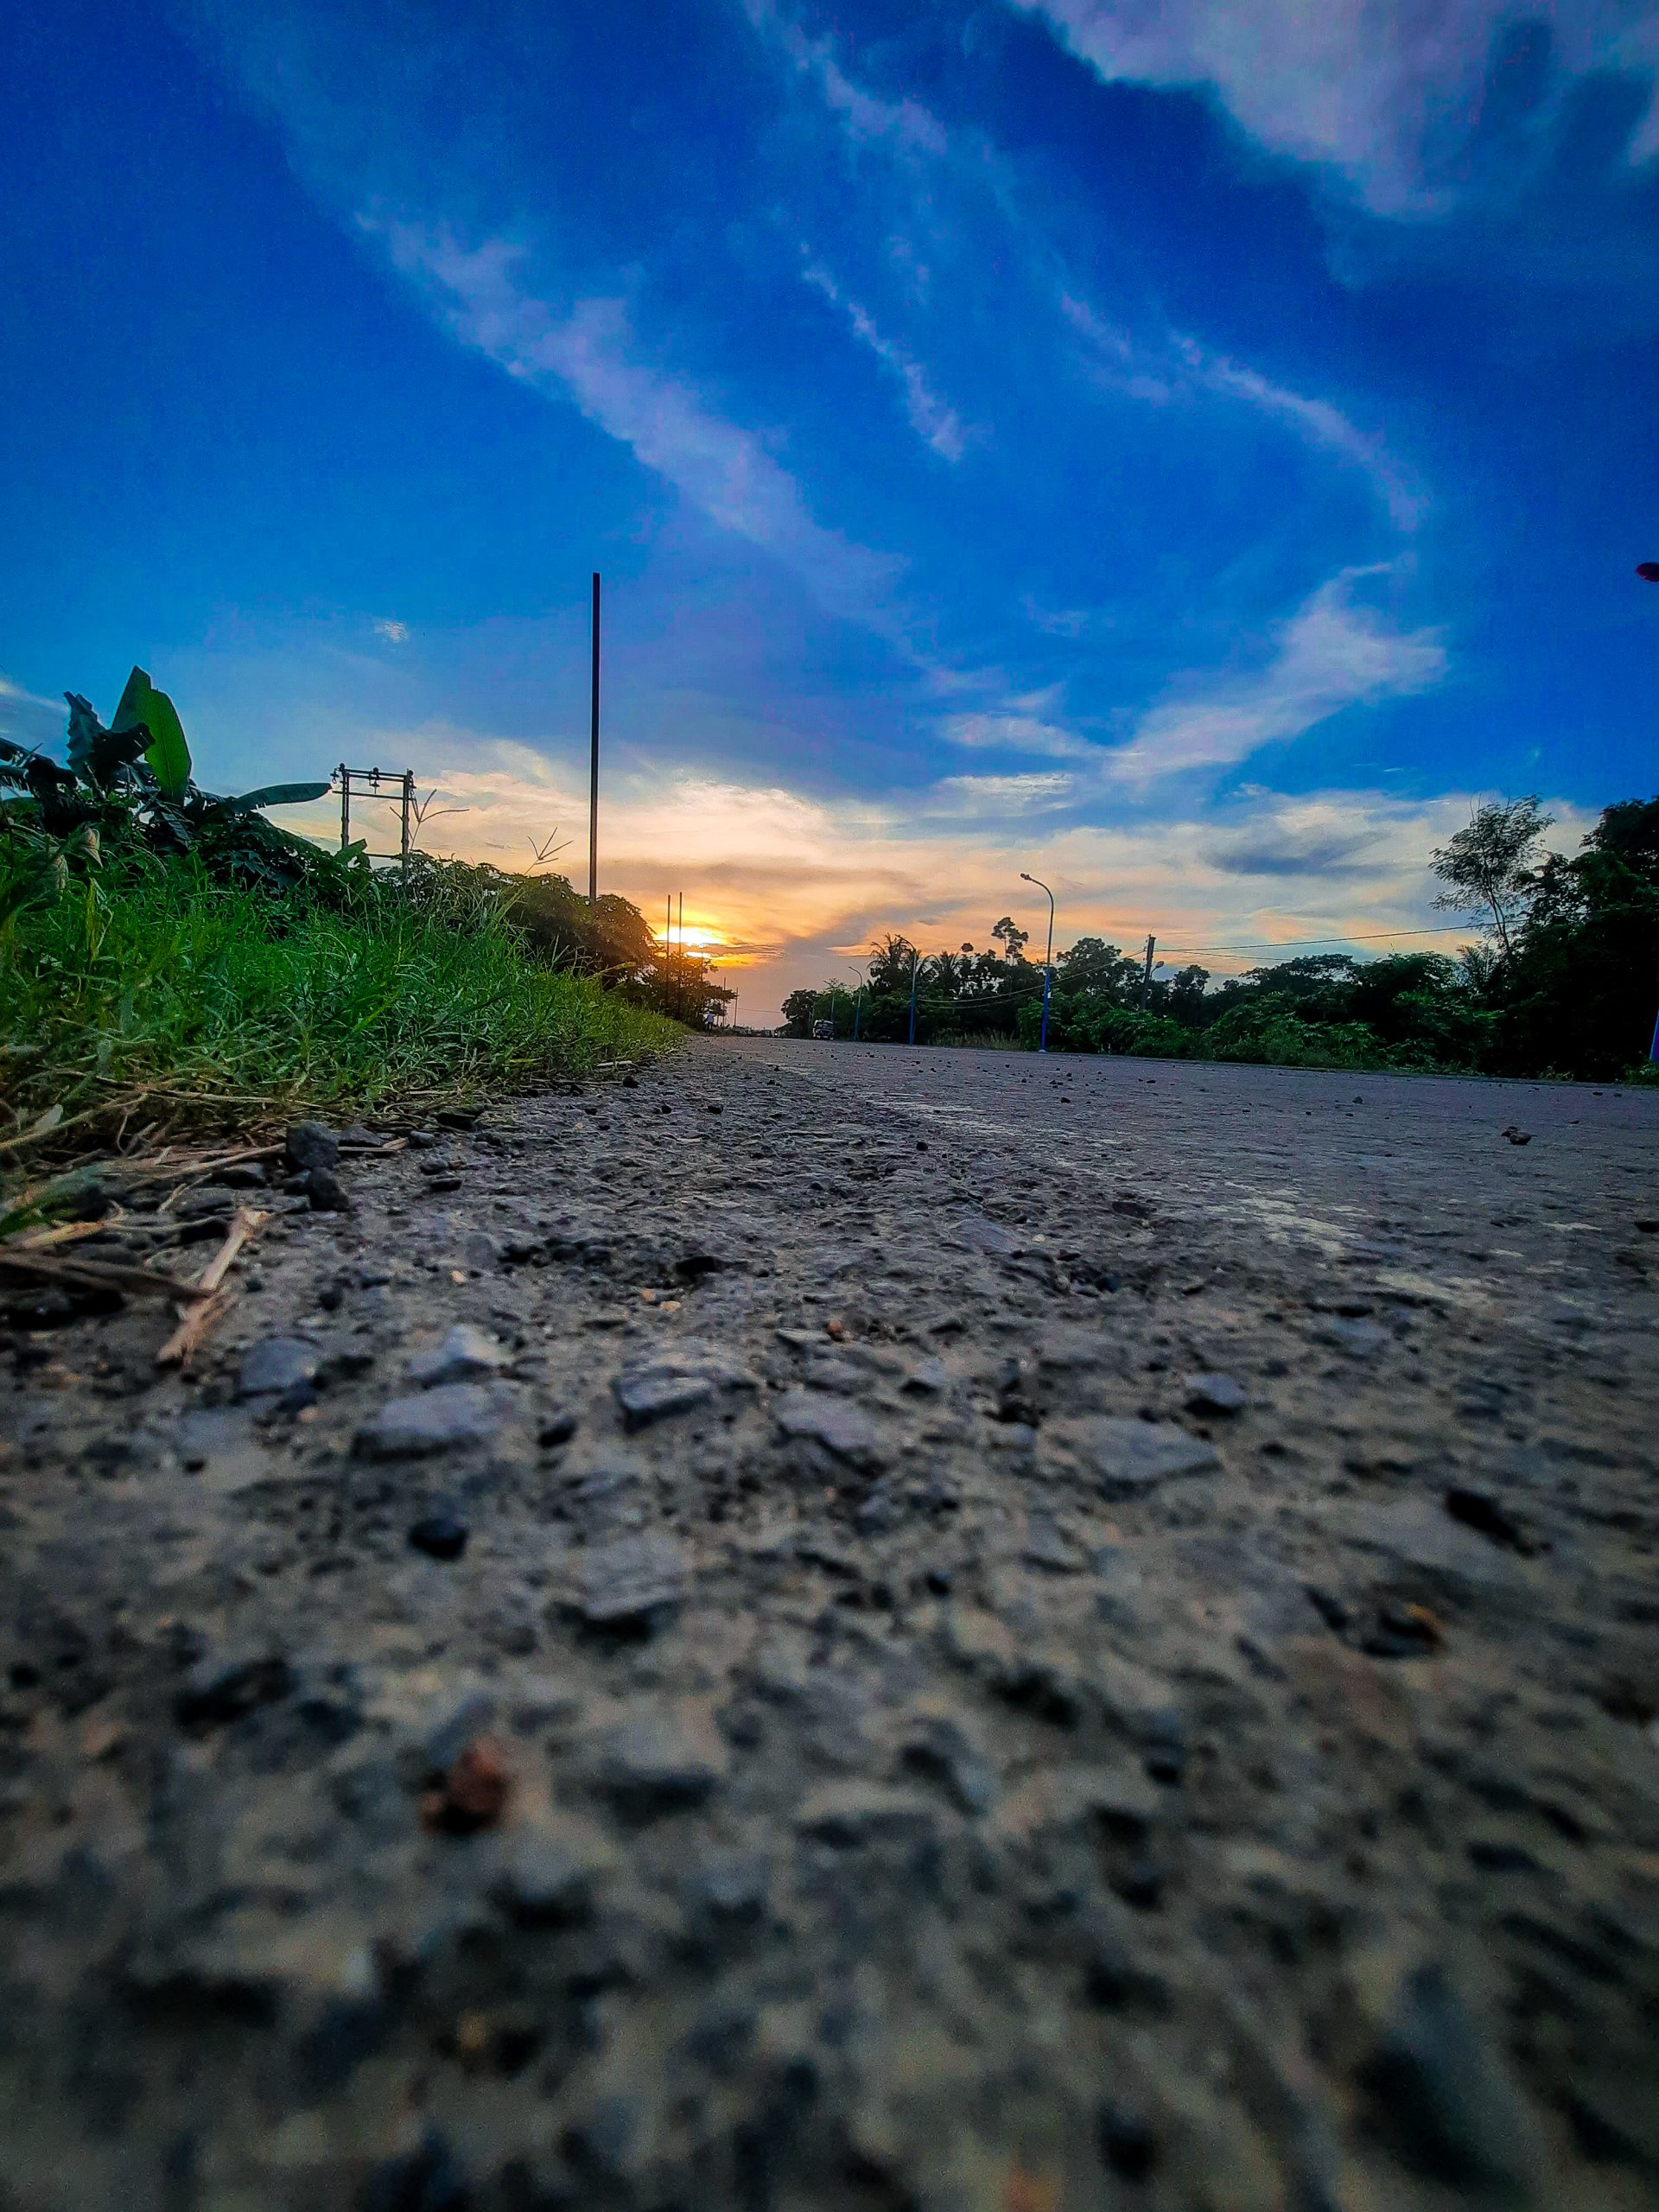 Sunset on the Road